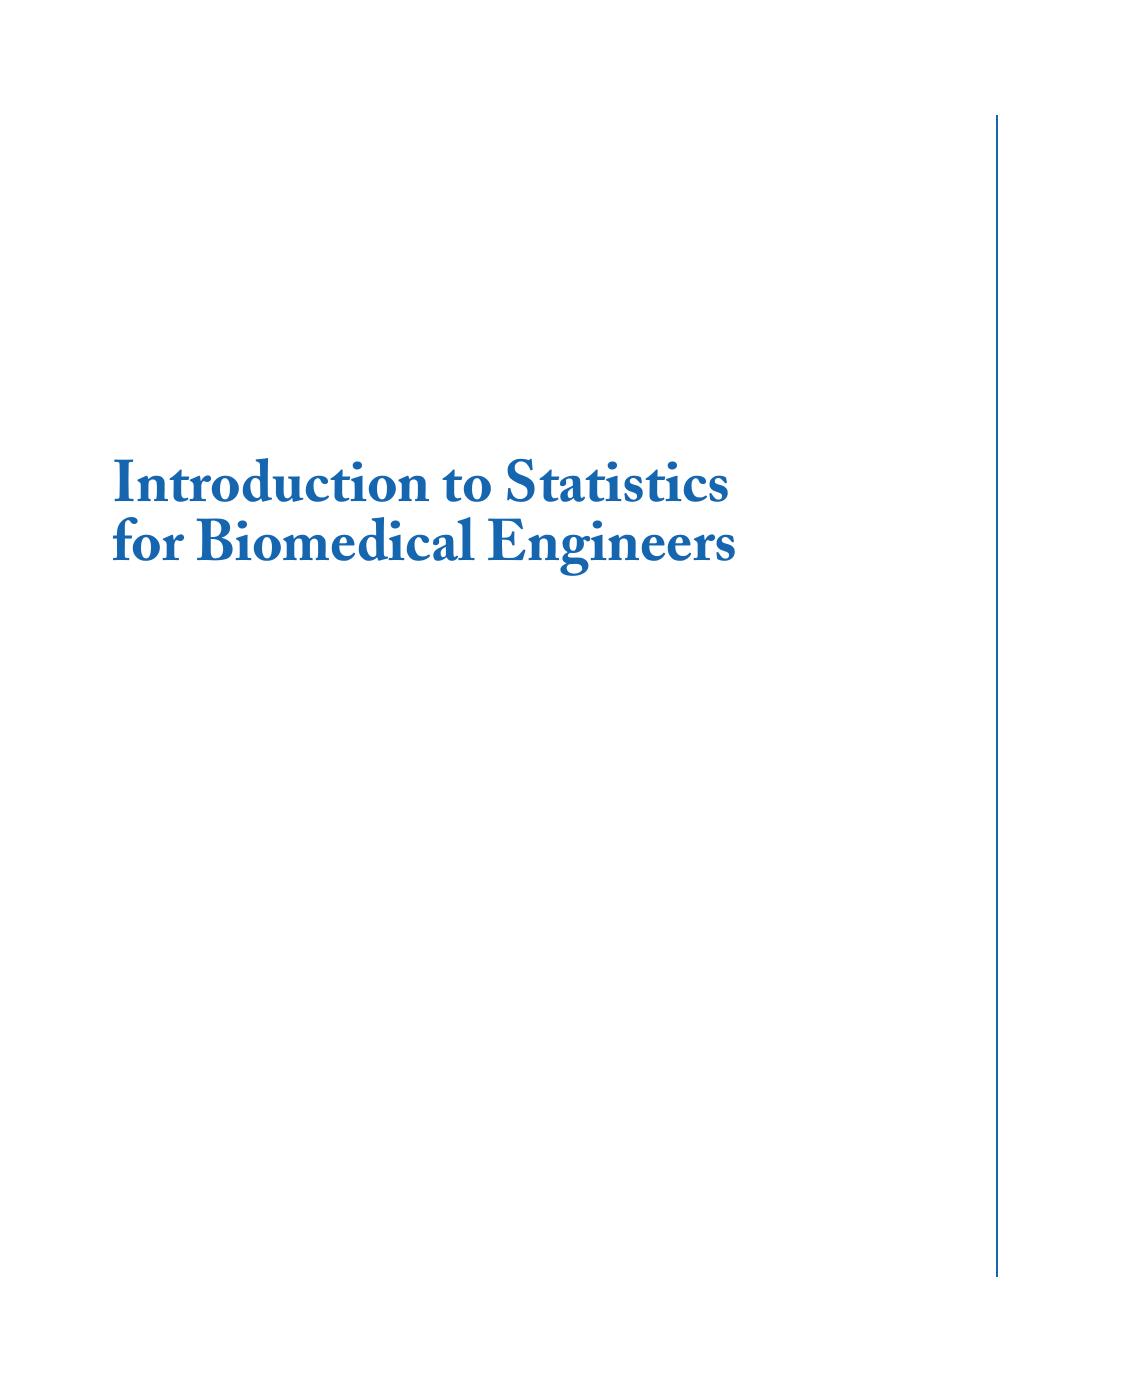 Introduction to Statistics for Biomedical Engineers